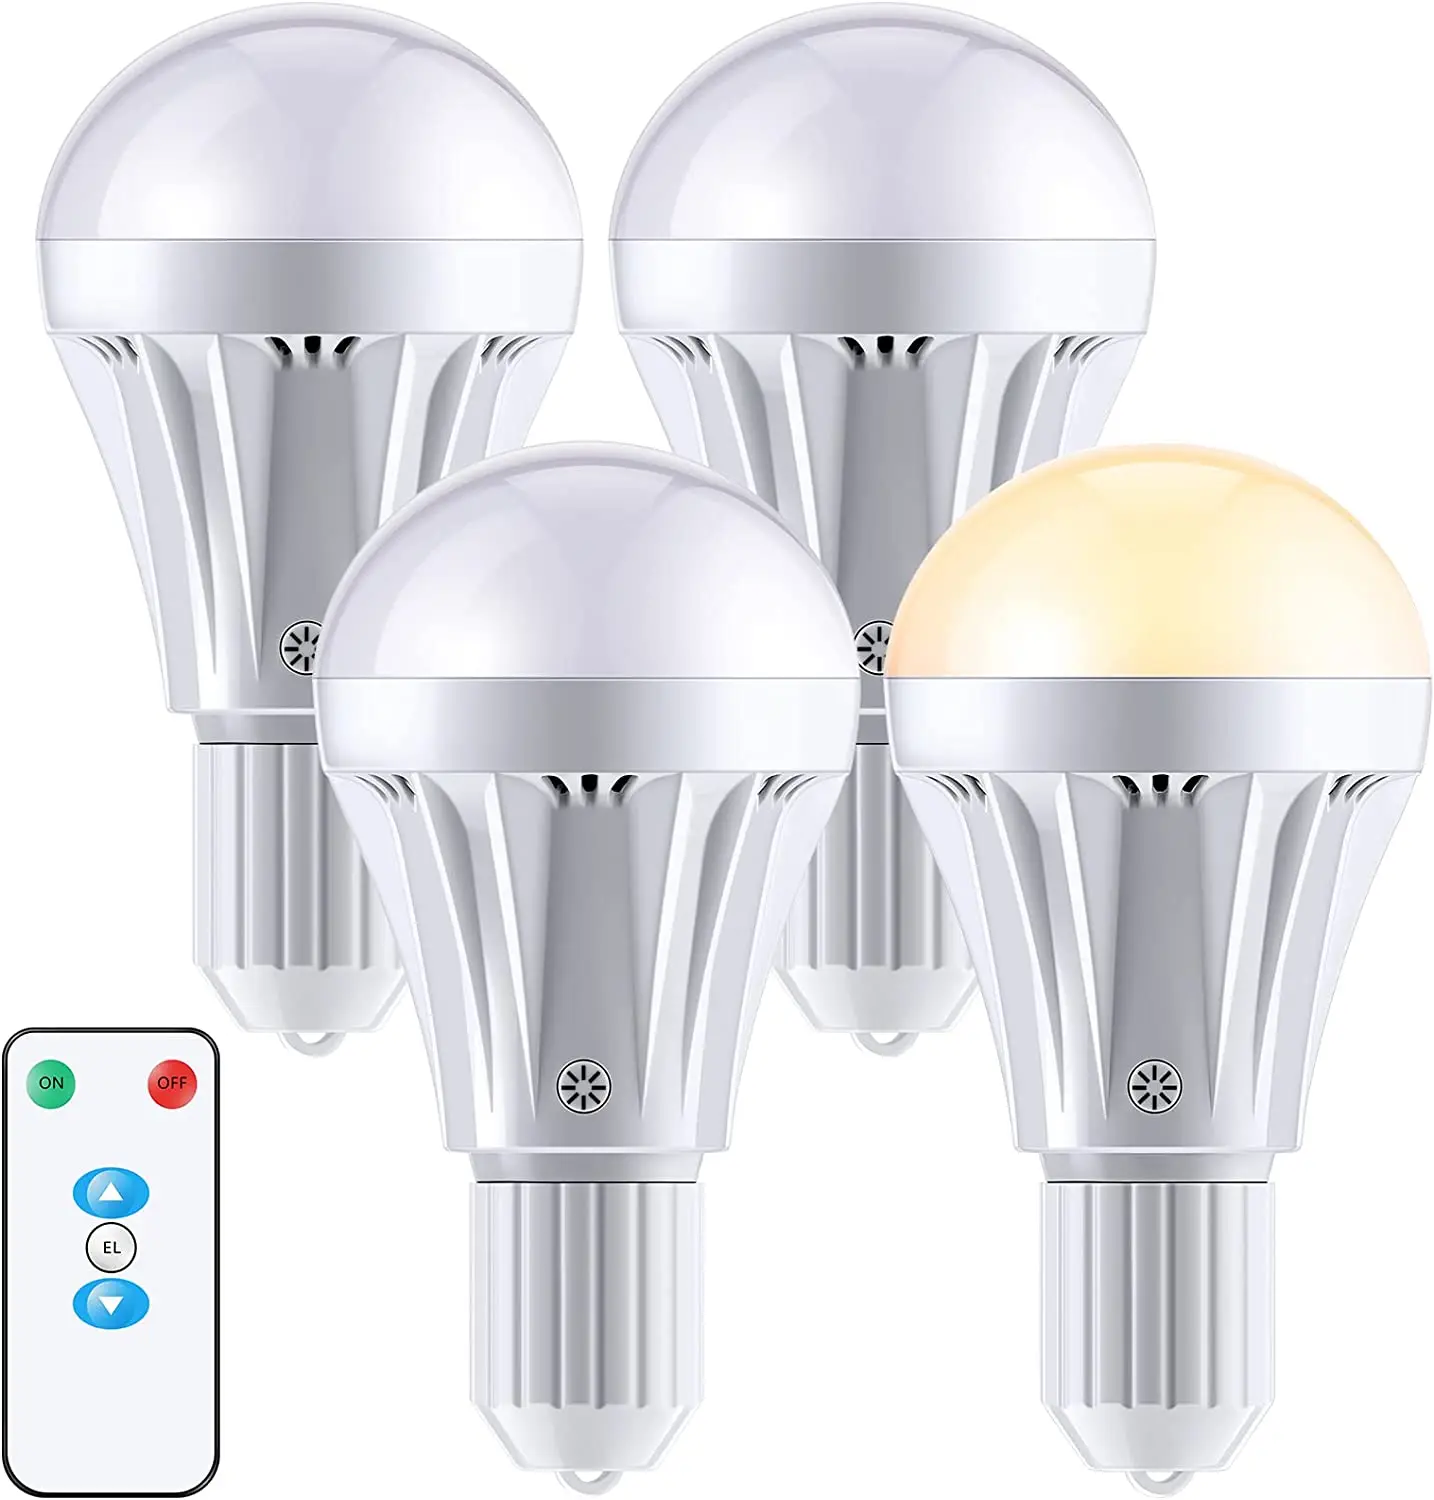 https://ae01.alicdn.com/kf/S6974c82108914b27b910b1fda3b44754k/New-7W-E27-Emergency-Light-Bulb-Rechargeable-Remote-Control-Dimming-LED-Lemp-Tent-Light-bulb-Insect.jpg